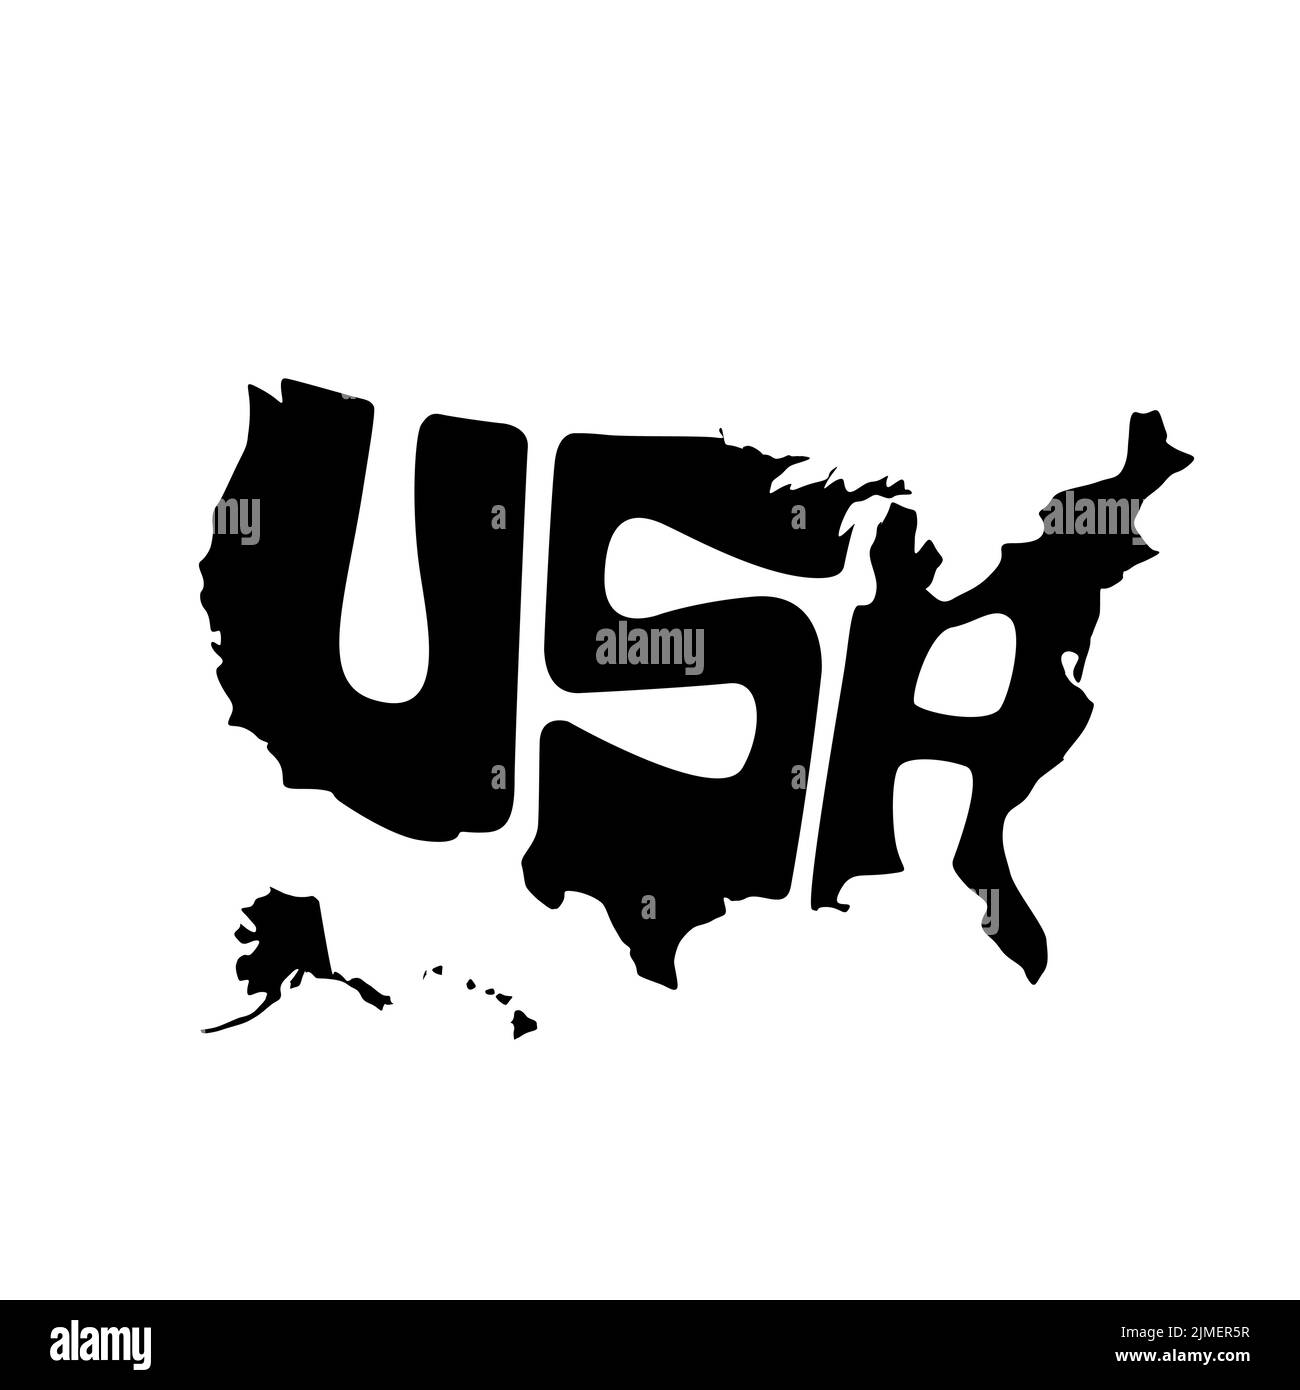 USA map typography. USA map lettering with black color. Stock Vector